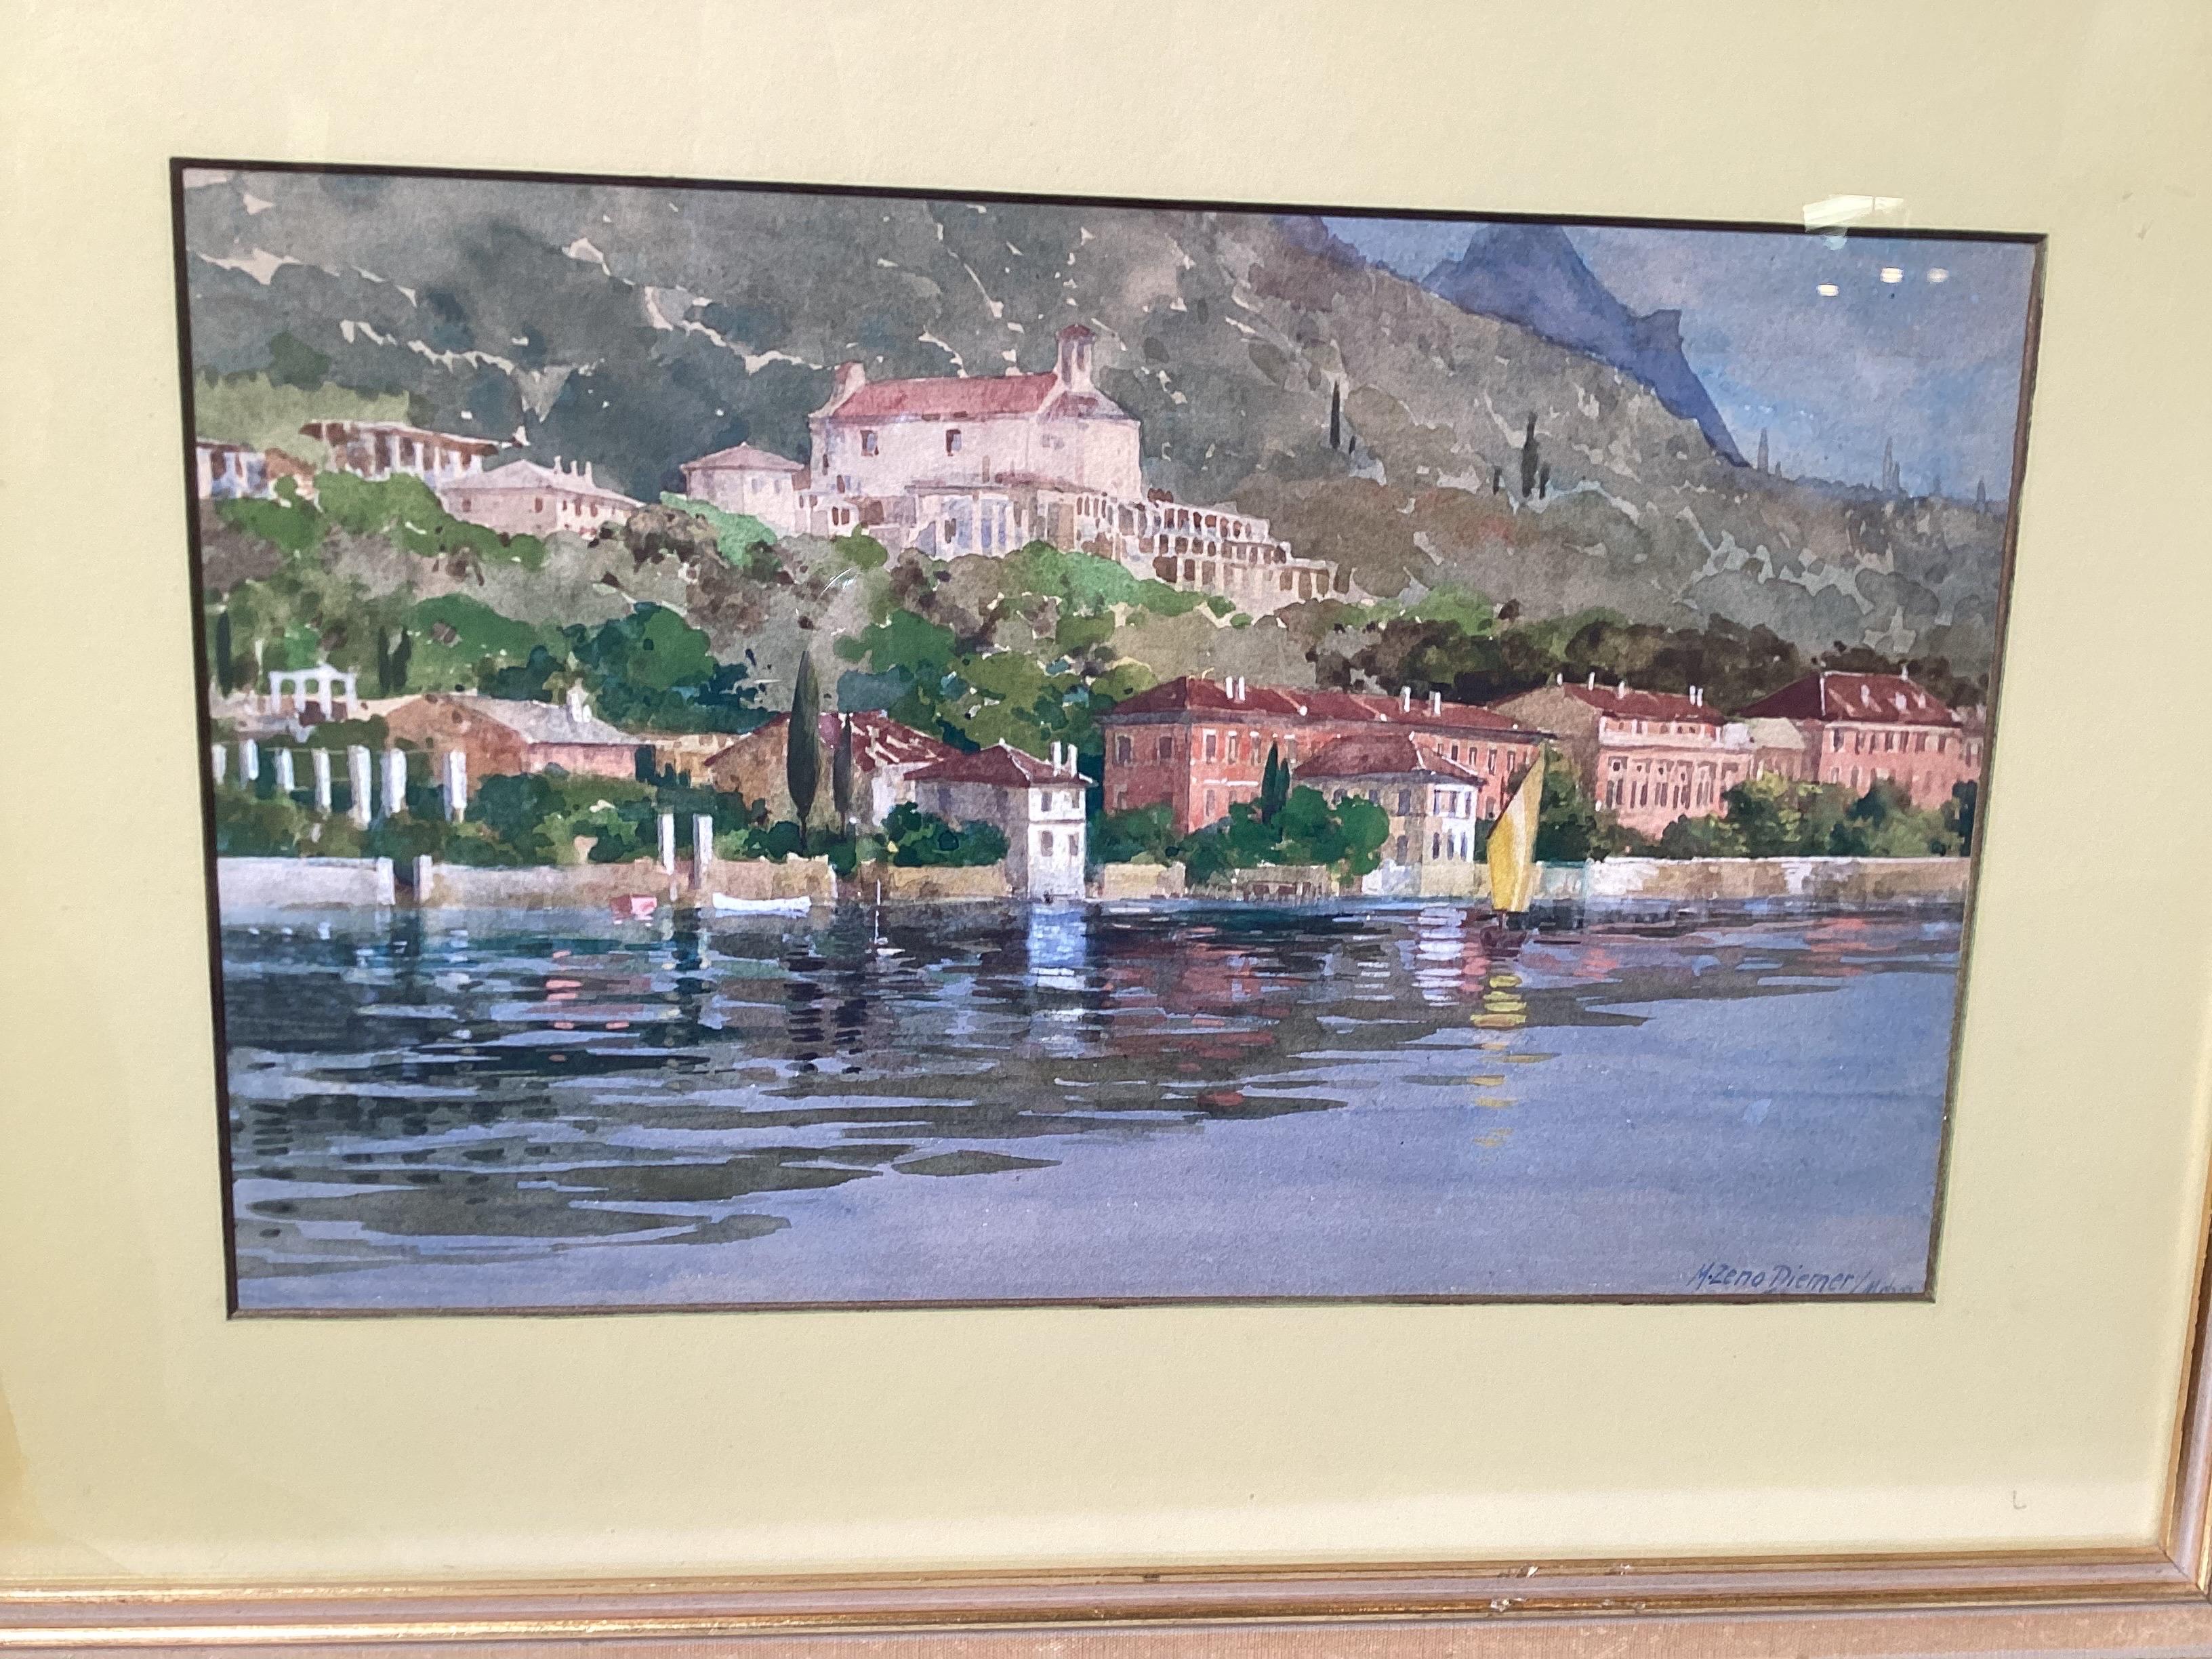 A hand painted watercolor by Michael Zeno Diemer (1867-1939). The original painting from Germany, signed and dated in giltwood frame under glass. The subject of a mountainside by the sea with a castle. 17 wide, 13.75 high, the image is 11 by 7.